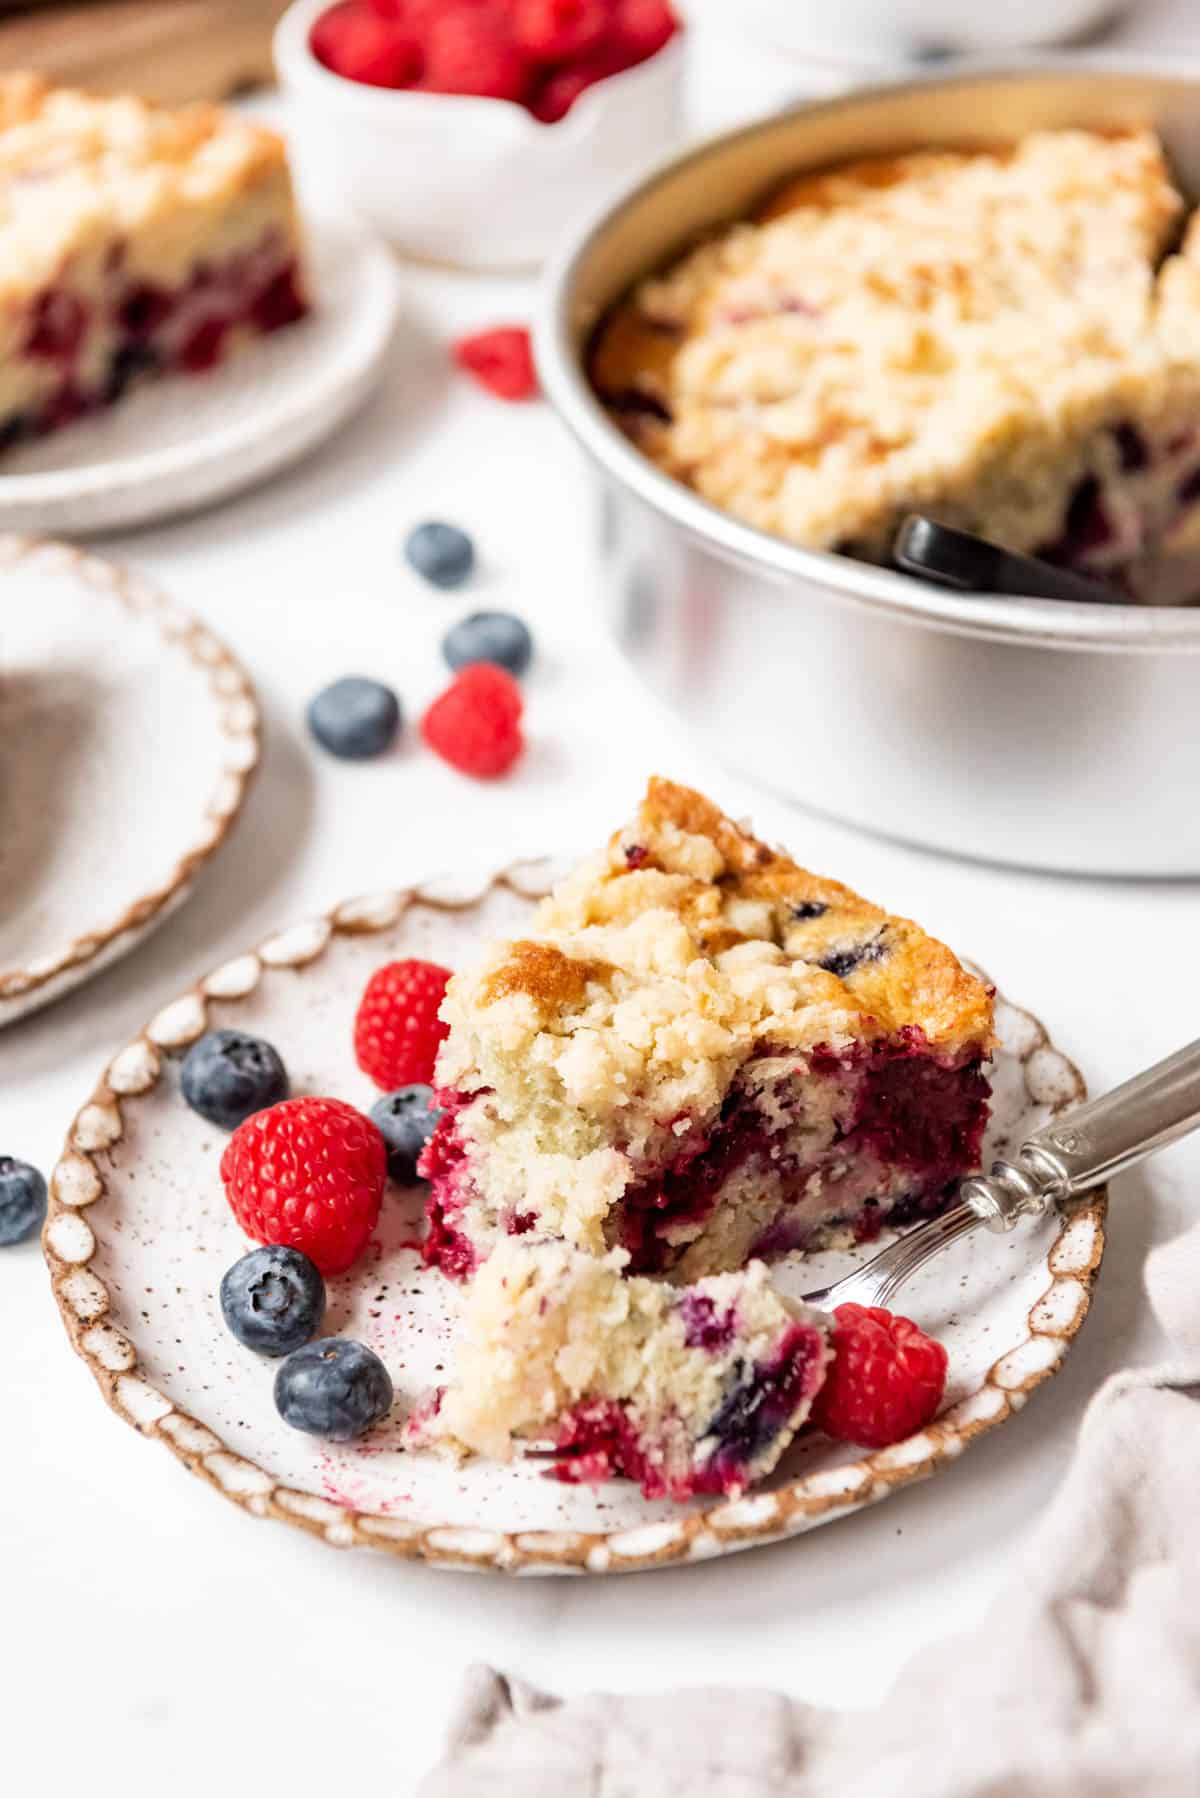 A slice of mixed berry breakfast cake with a bite taken out of it.